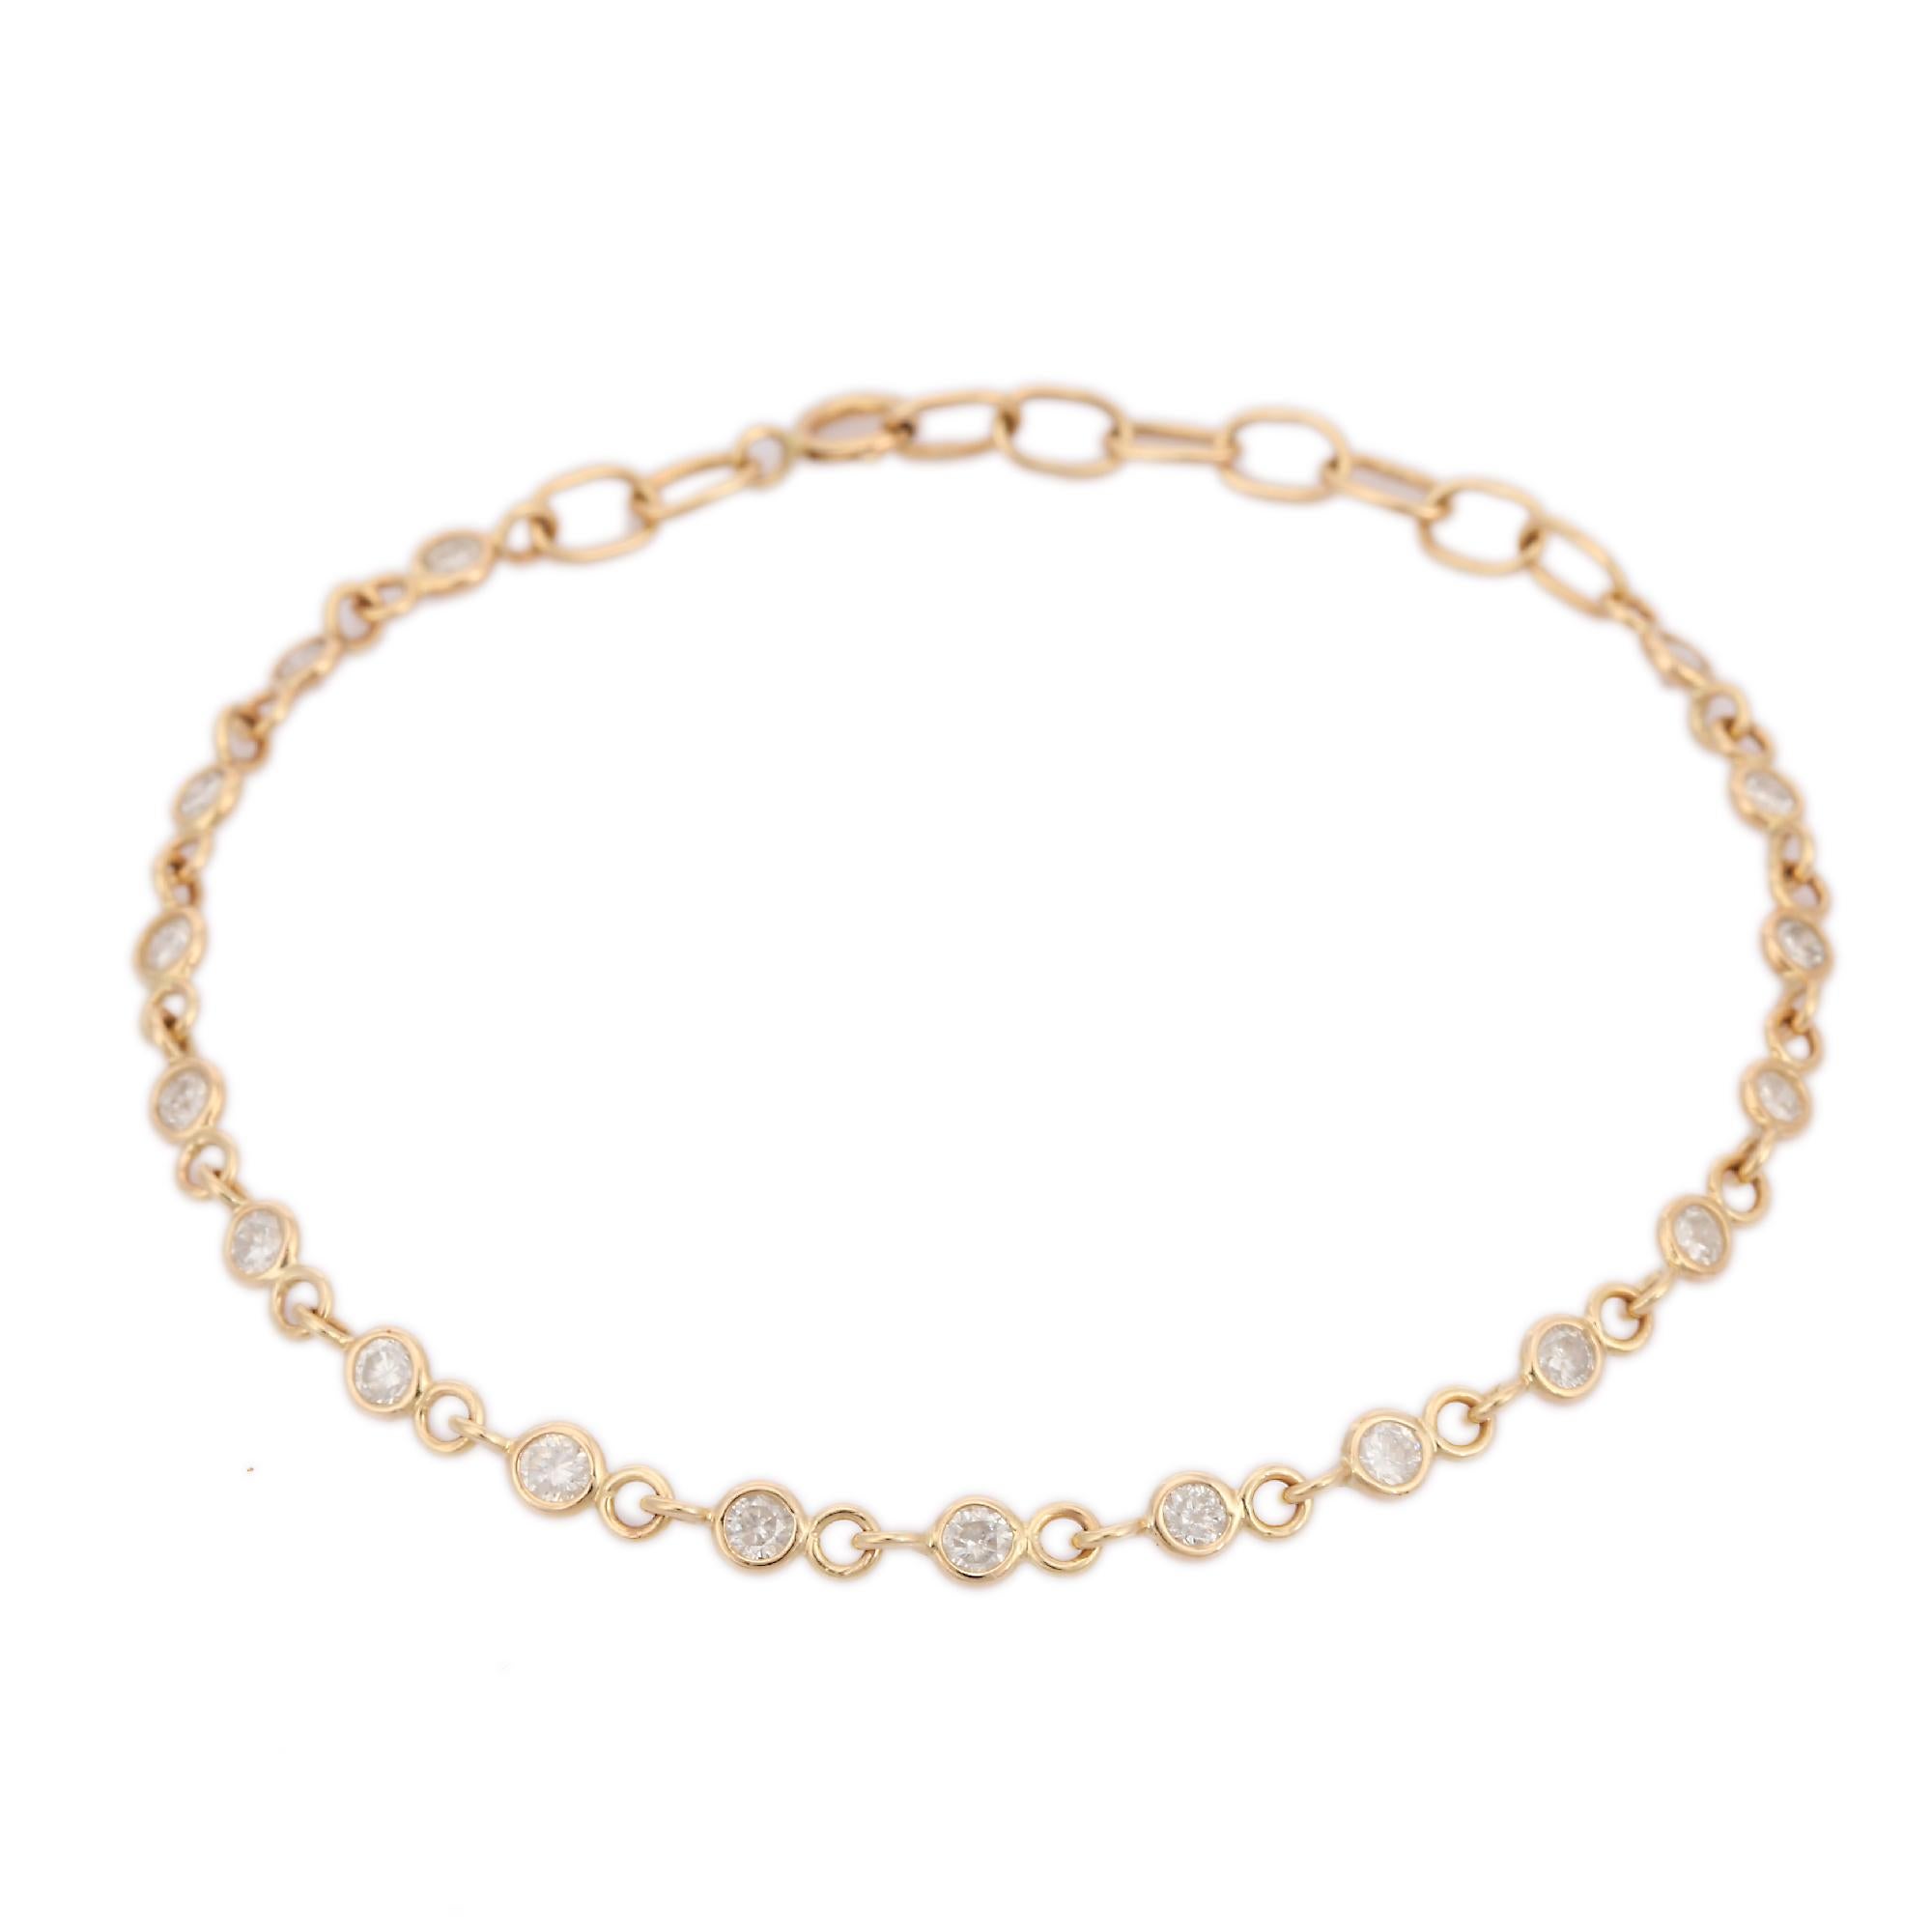 Stackable 1.24 ct Natural Diamond Chain Bracelet in 14K Solid Yellow Gold In New Condition For Sale In Houston, TX